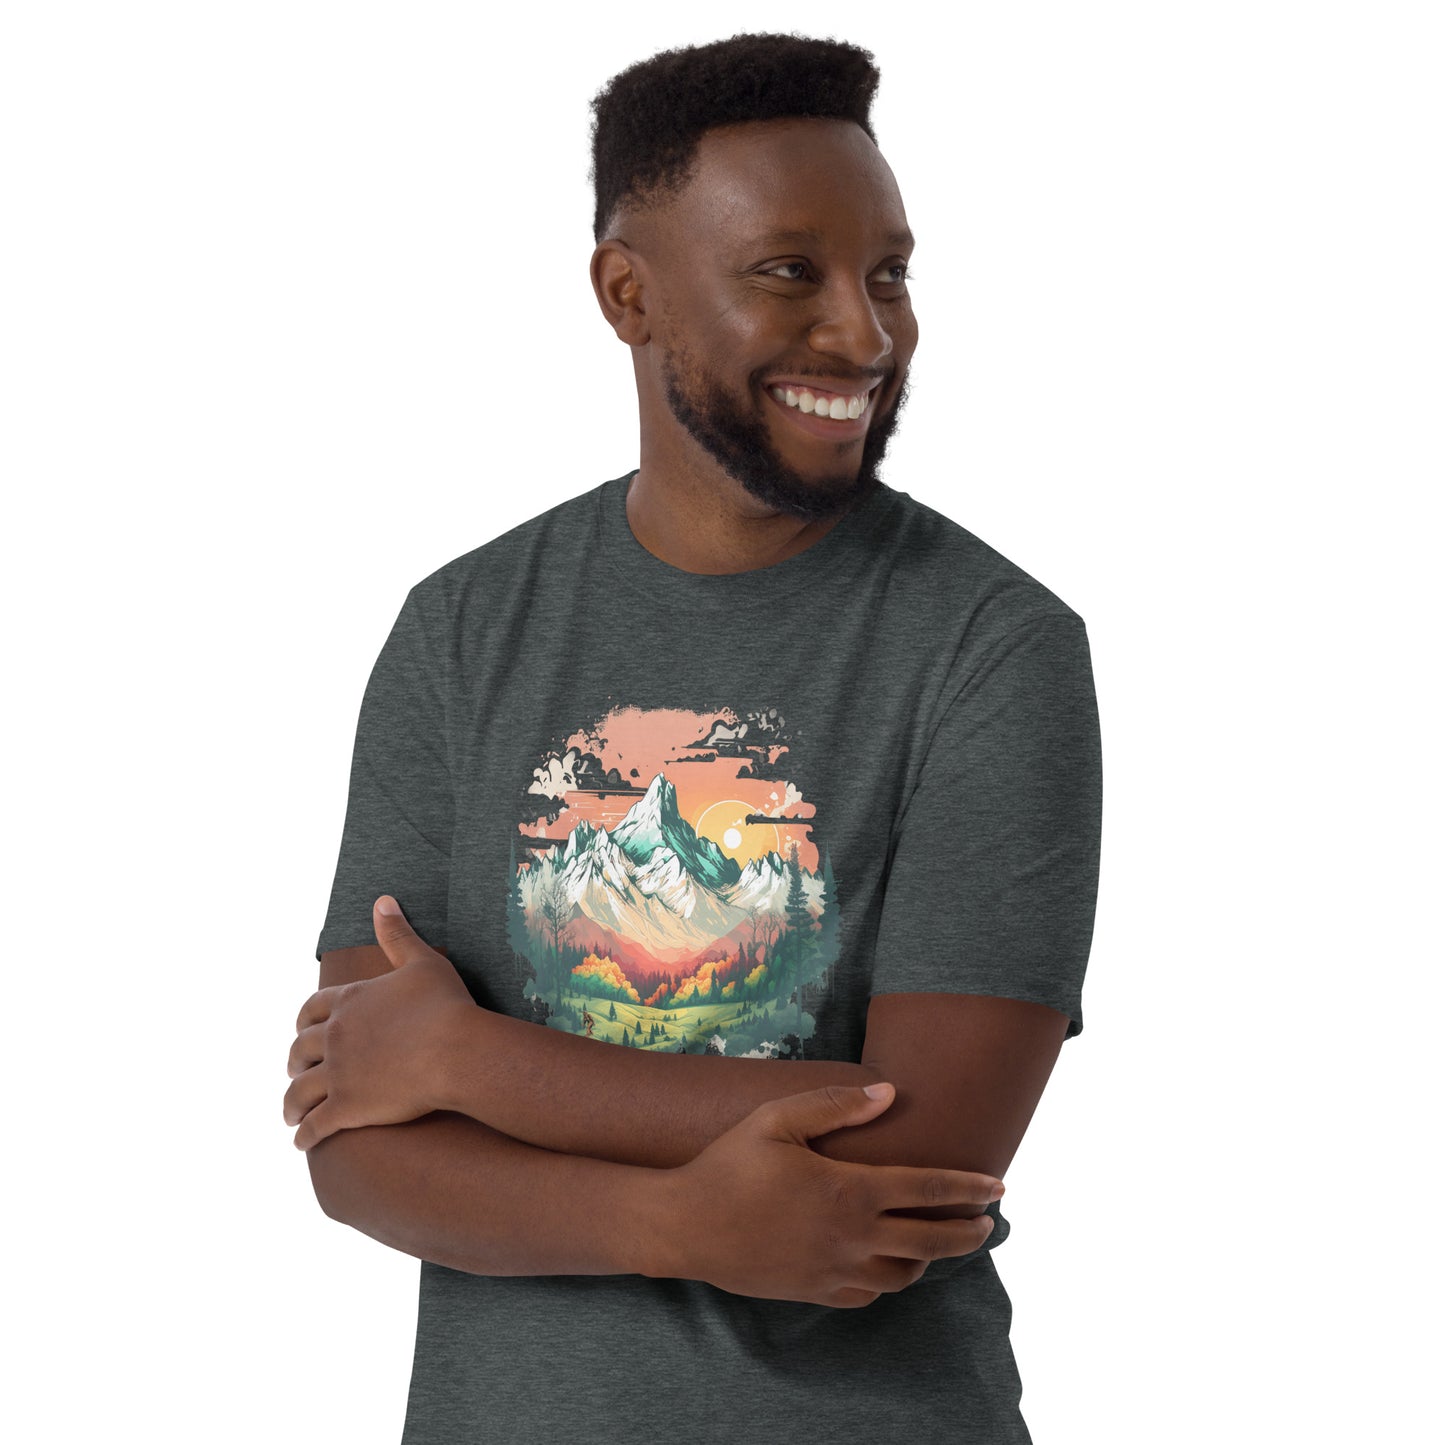 The Great Outdoors Short-Sleeve Unisex T-Shirt